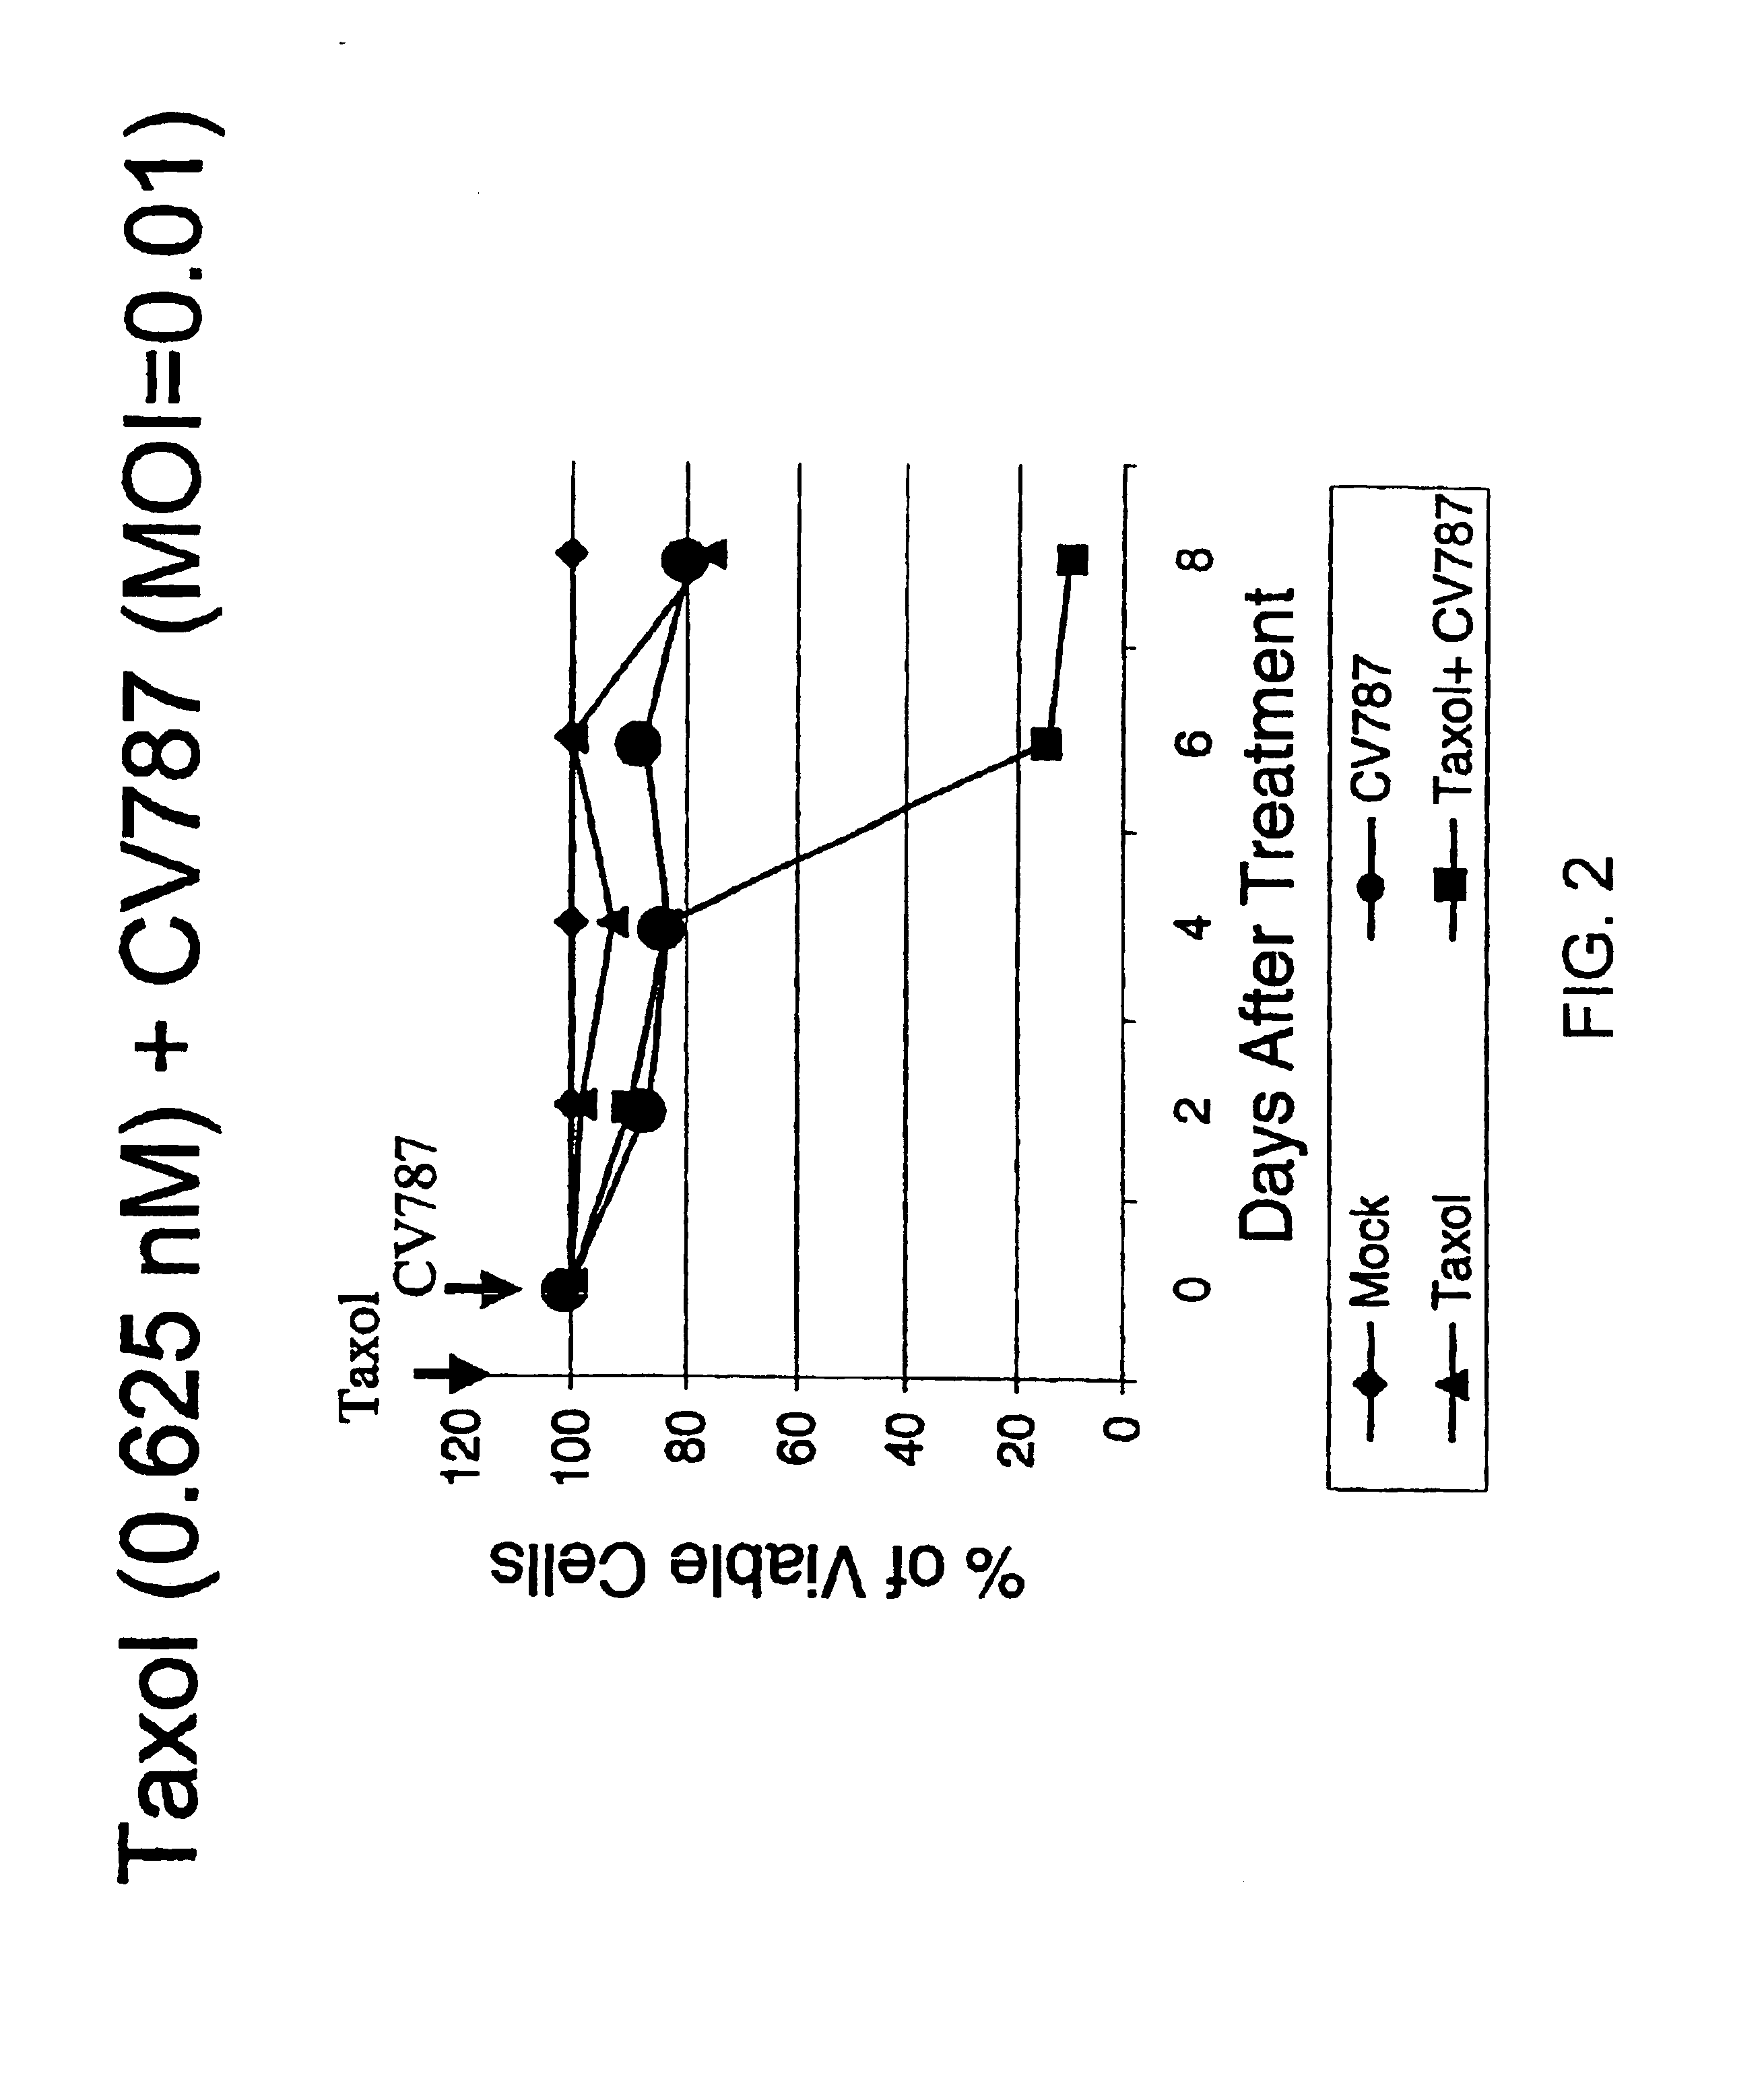 Methods of treating neoplasia with combination of target-cell specific adenovirus, chemotherapy and radiation